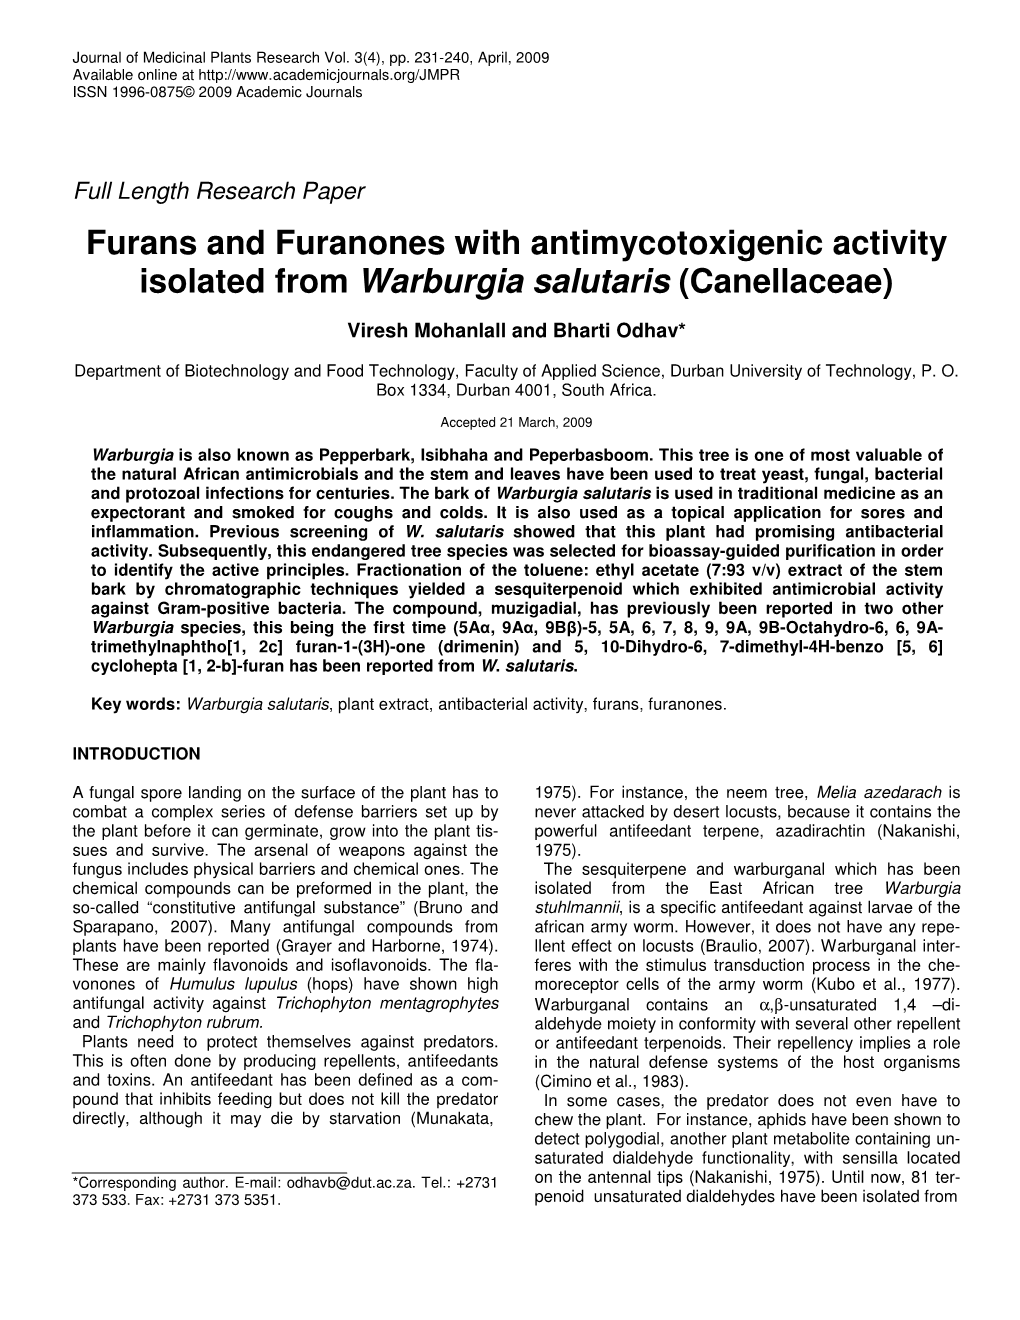 Furans and Furanones with Antimycotoxigenic Activity Isolated from Warburgia Salutaris (Canellaceae)